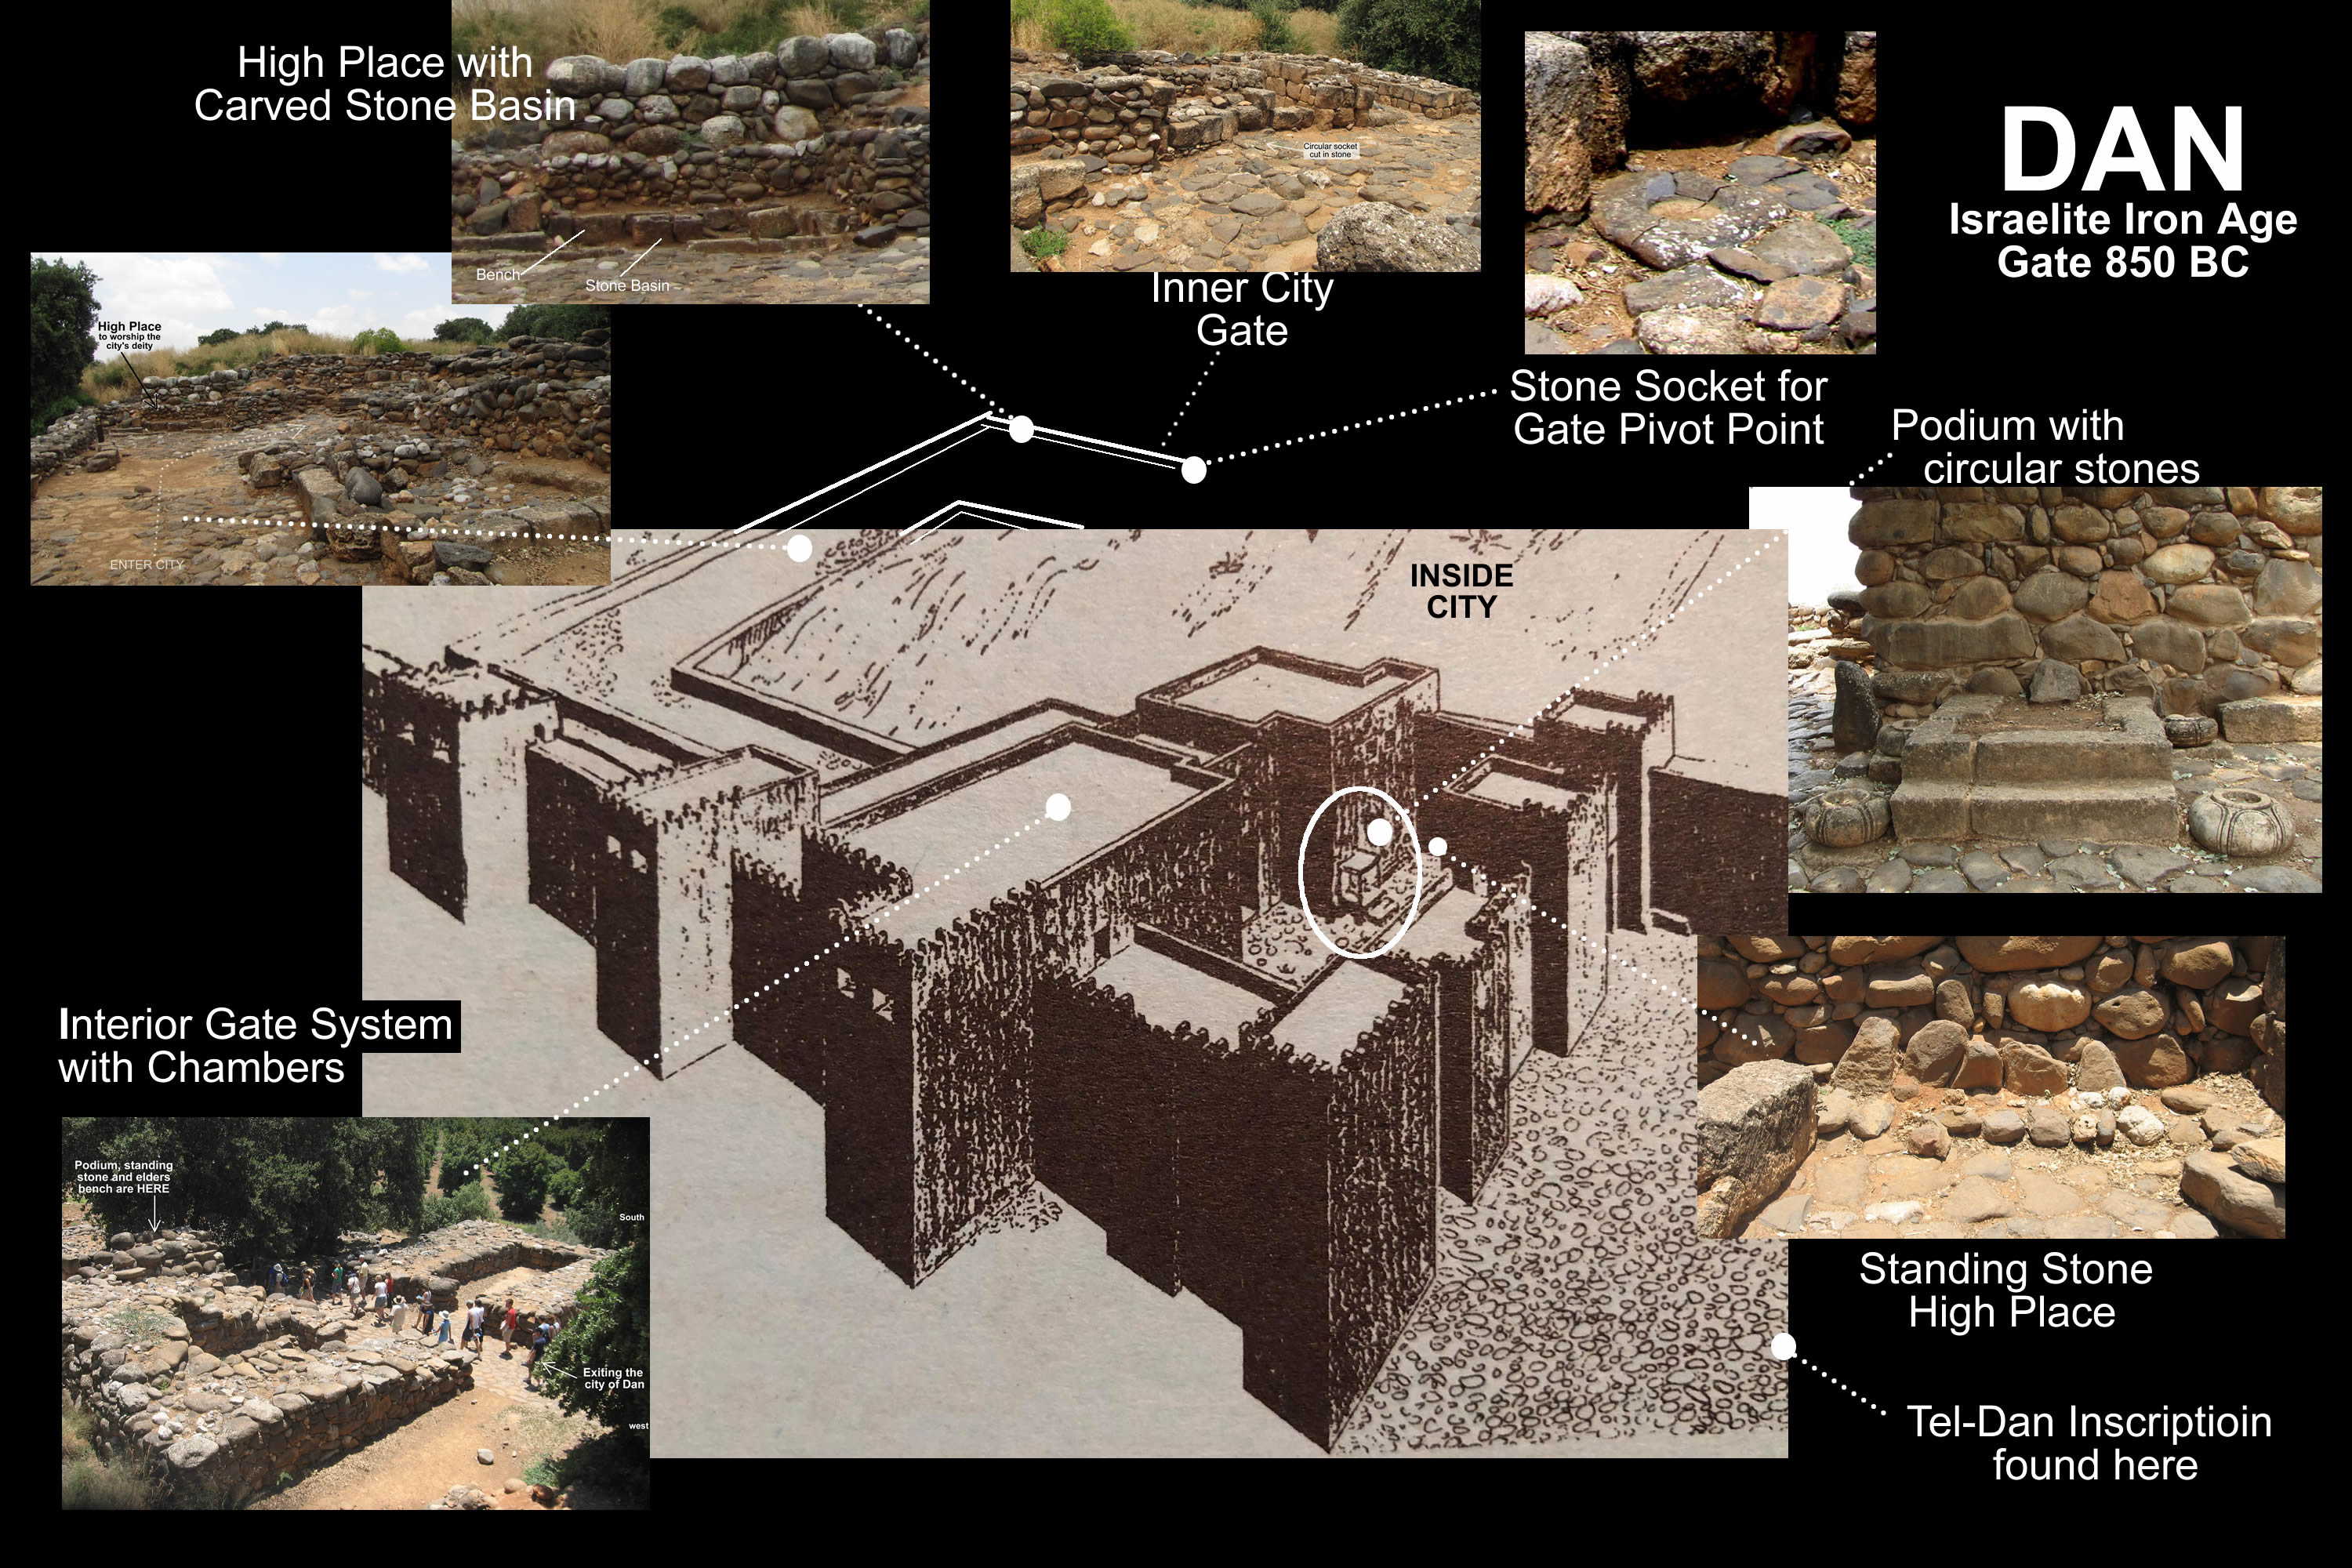 Detailed diagram of Iron Age Israelite Gate at Dan with photo image inserts